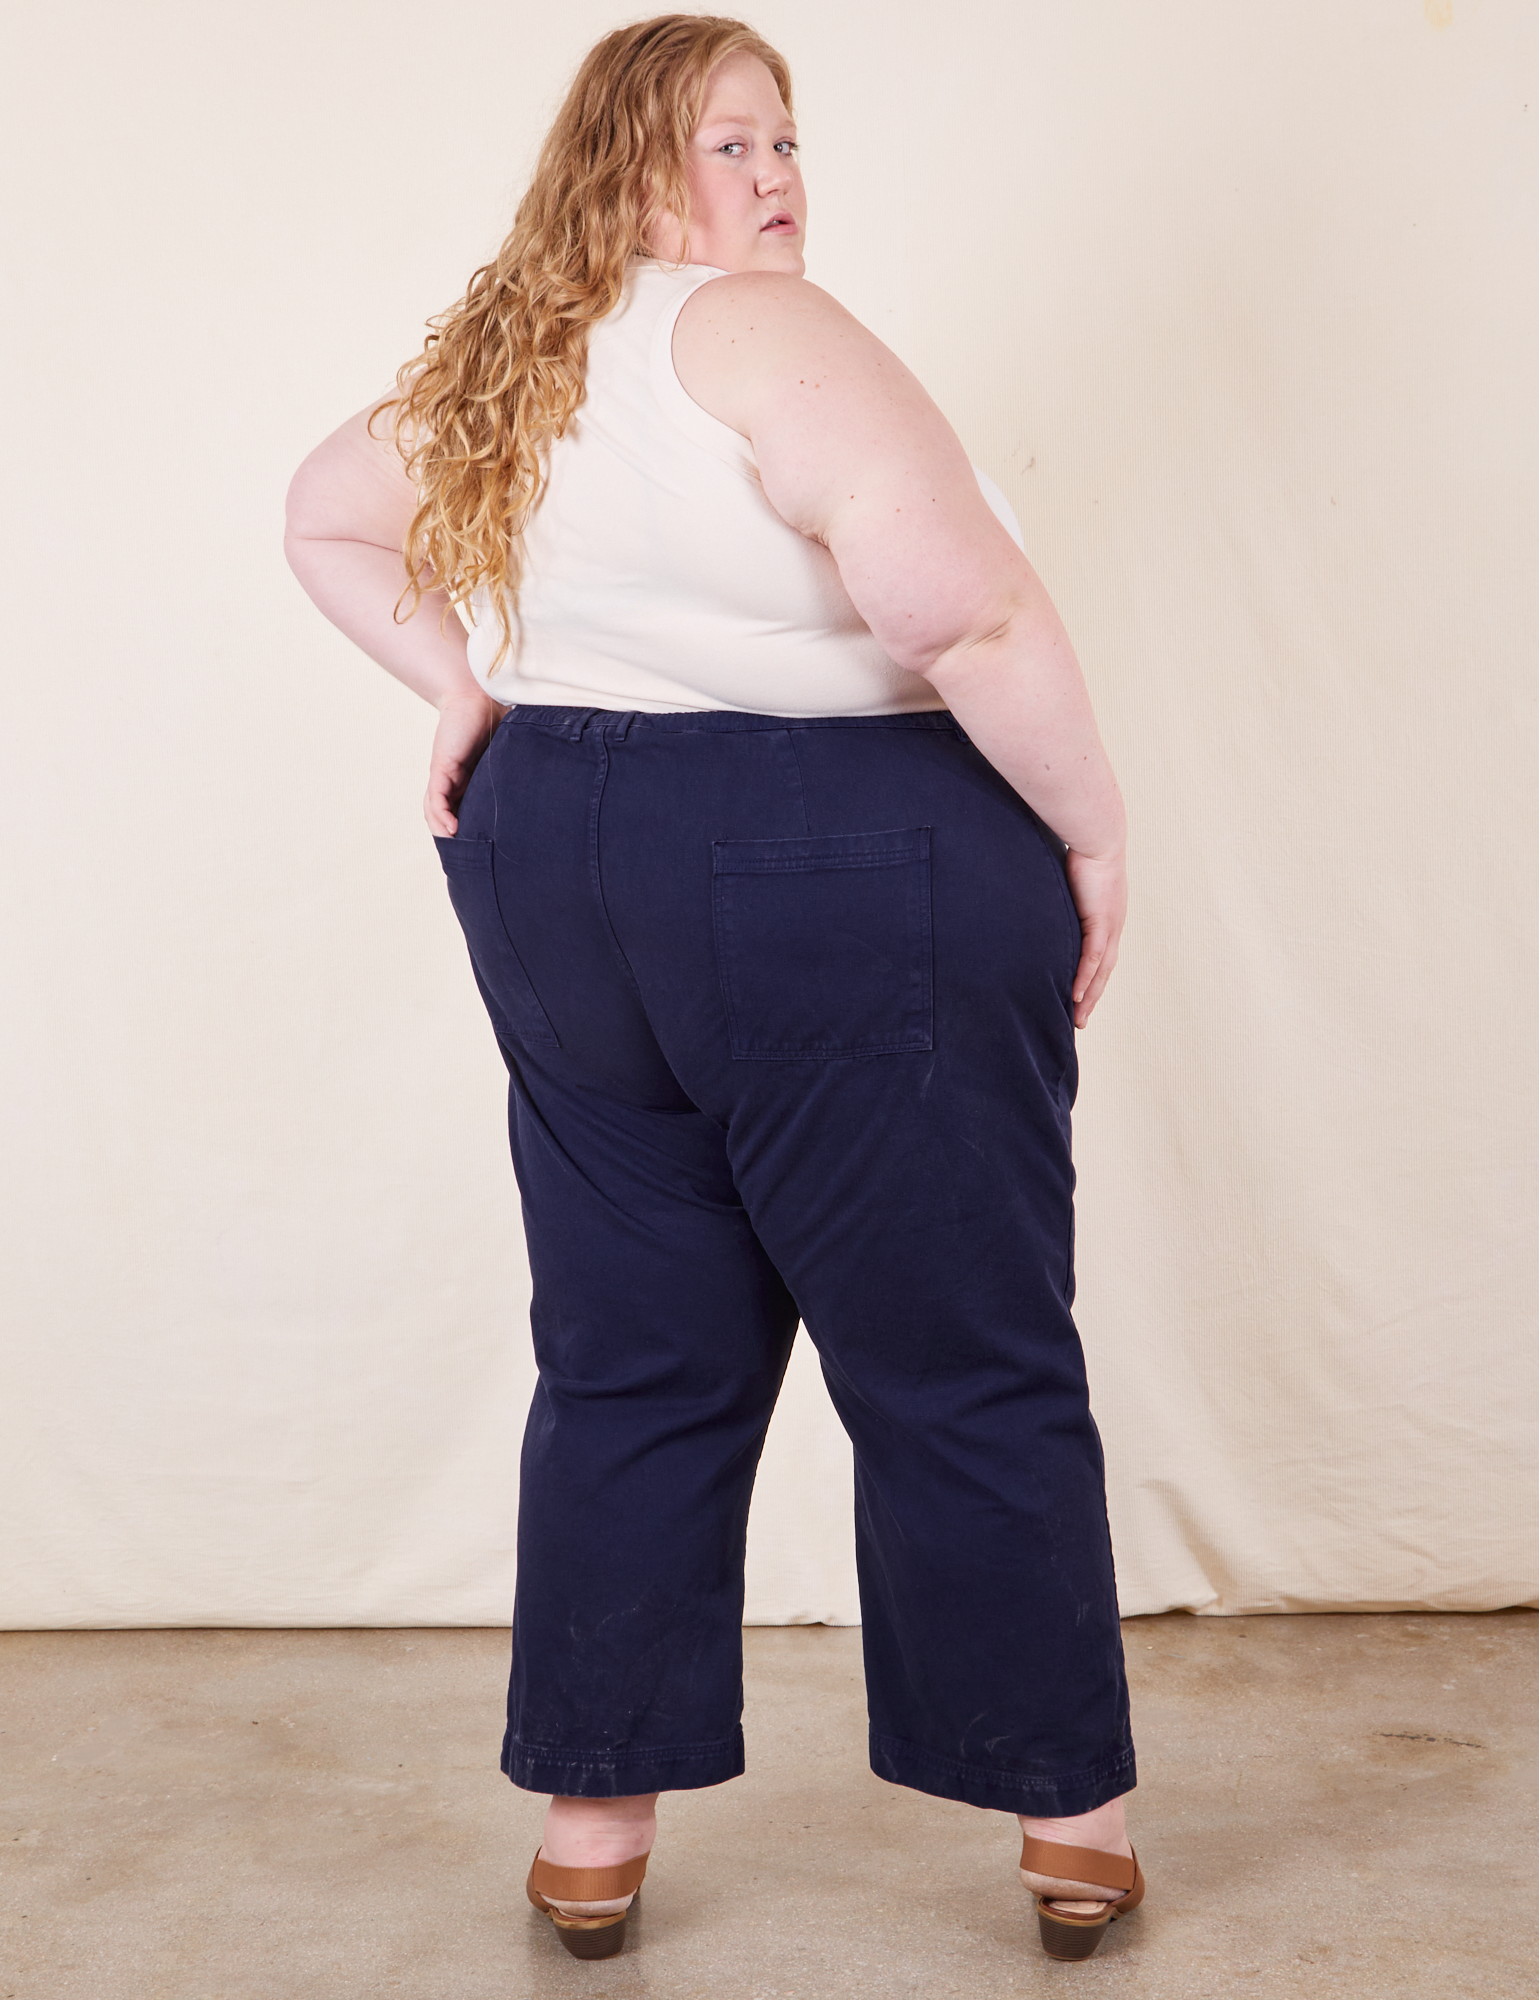 Back view of Western Pants in Navy Blue and vintage off-white Tank Top on Catie